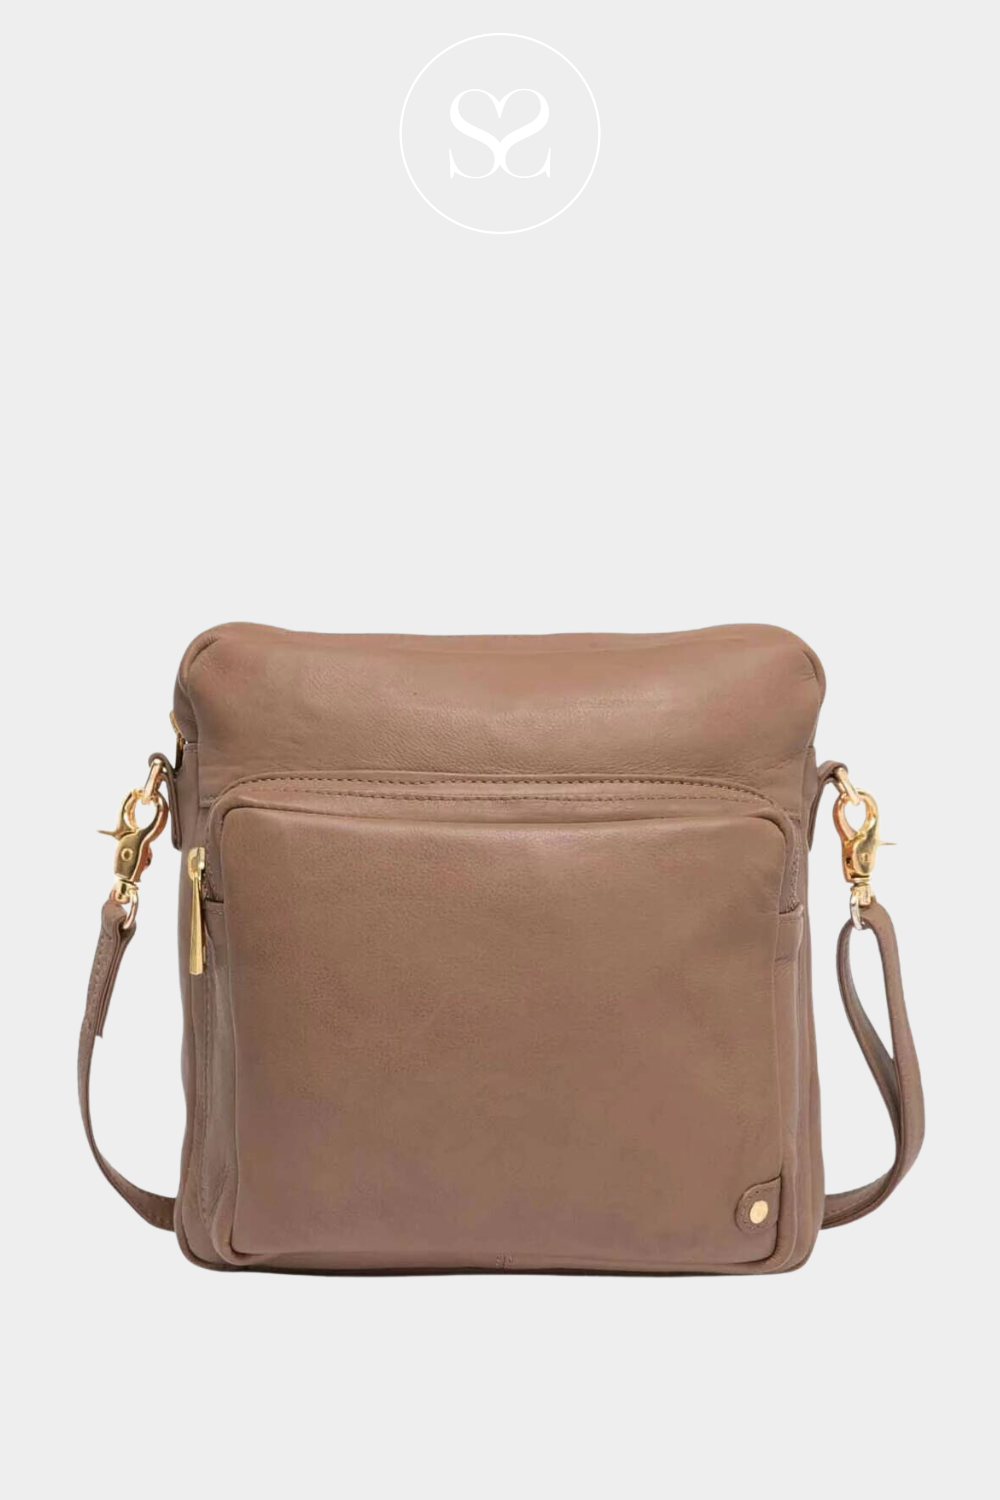 DEPECHE 13606 CAMEL HONEY LEATHER CROSSBODY BAG WITH GOLD HARDWARE AND FRONT ZIP POCKET